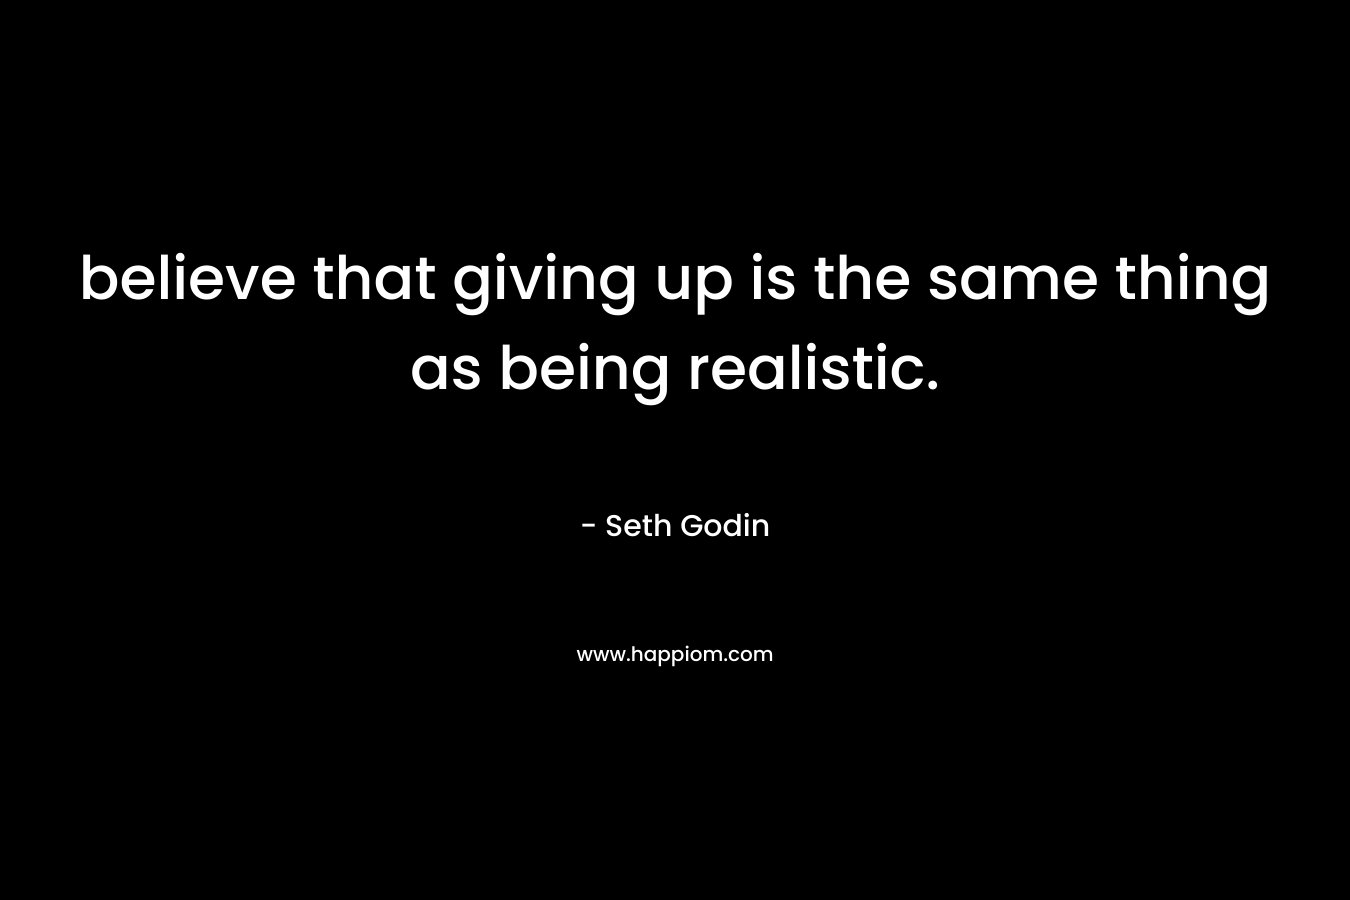 believe that giving up is the same thing as being realistic.